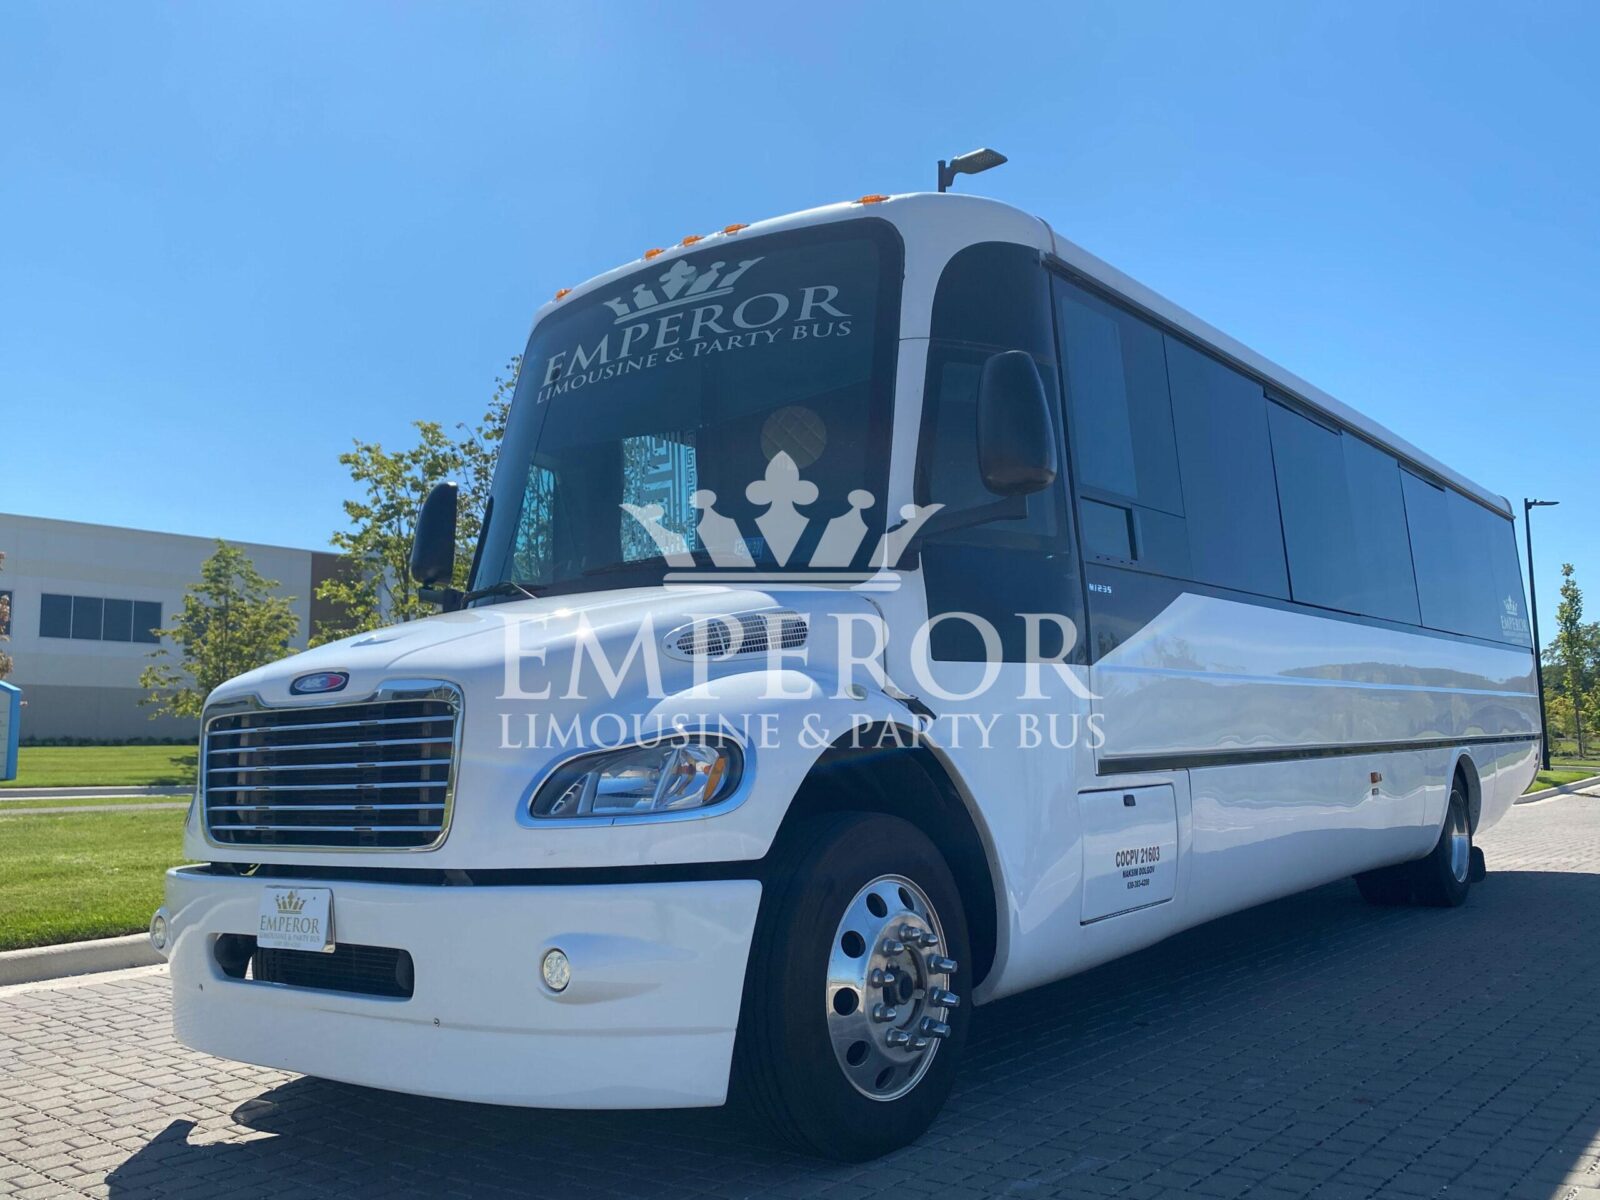 Party bus rental service in Saint Charles